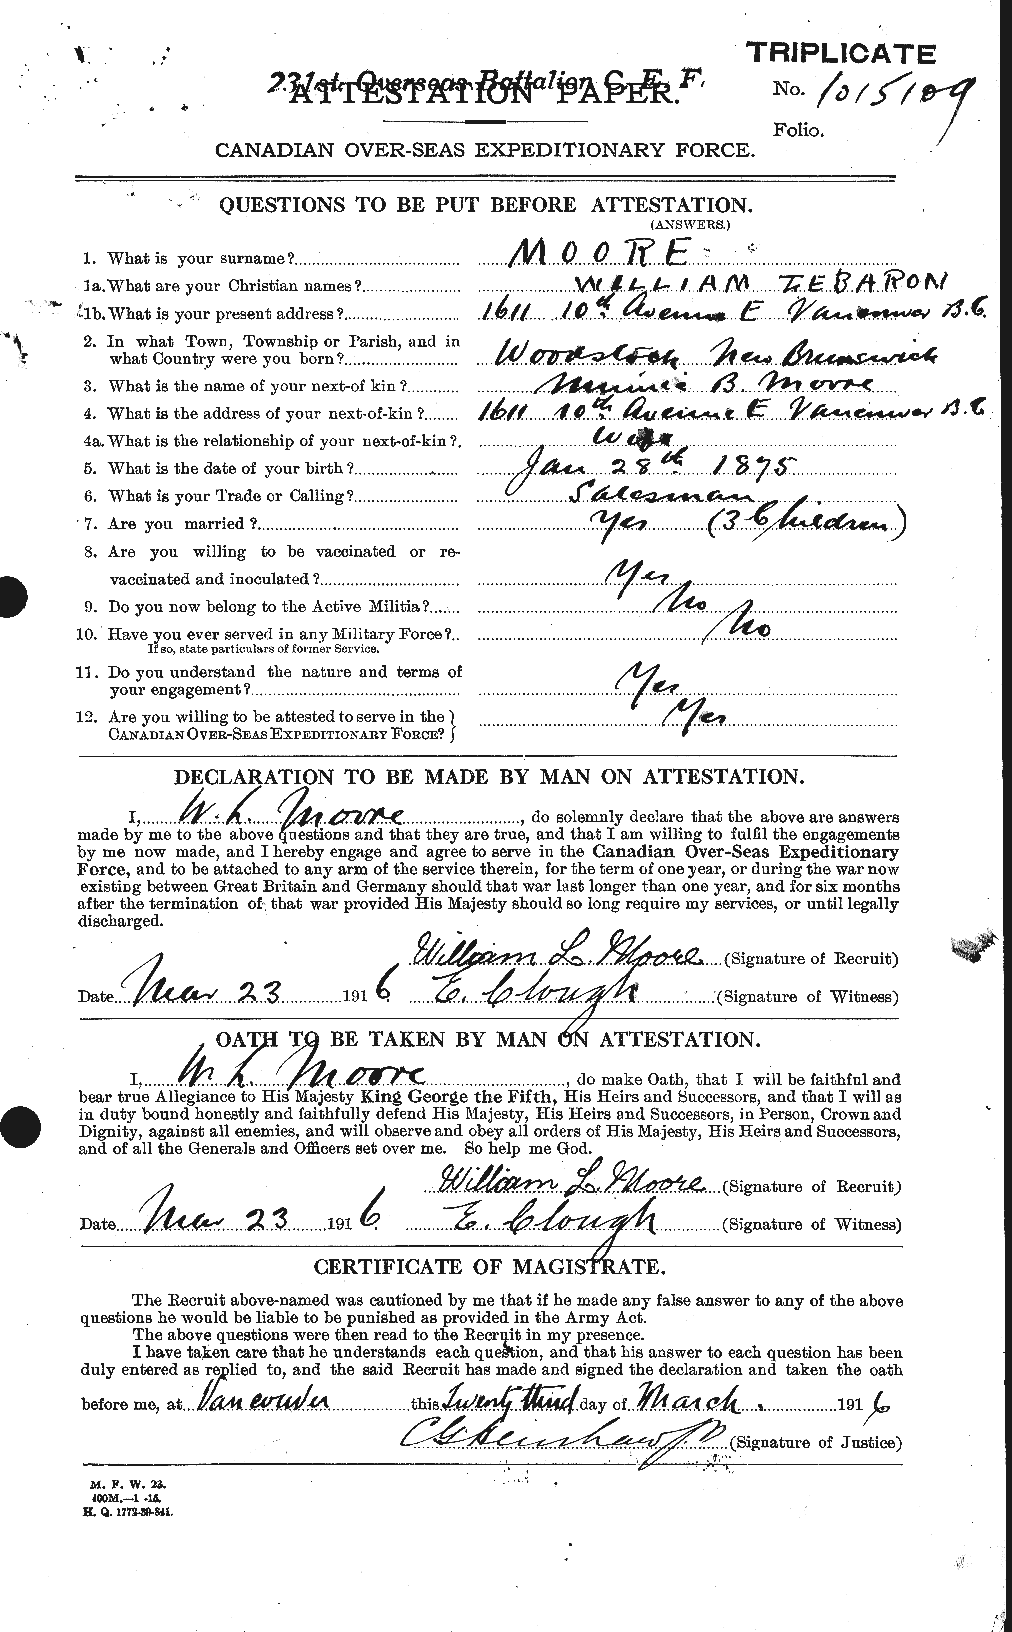 Personnel Records of the First World War - CEF 505853a